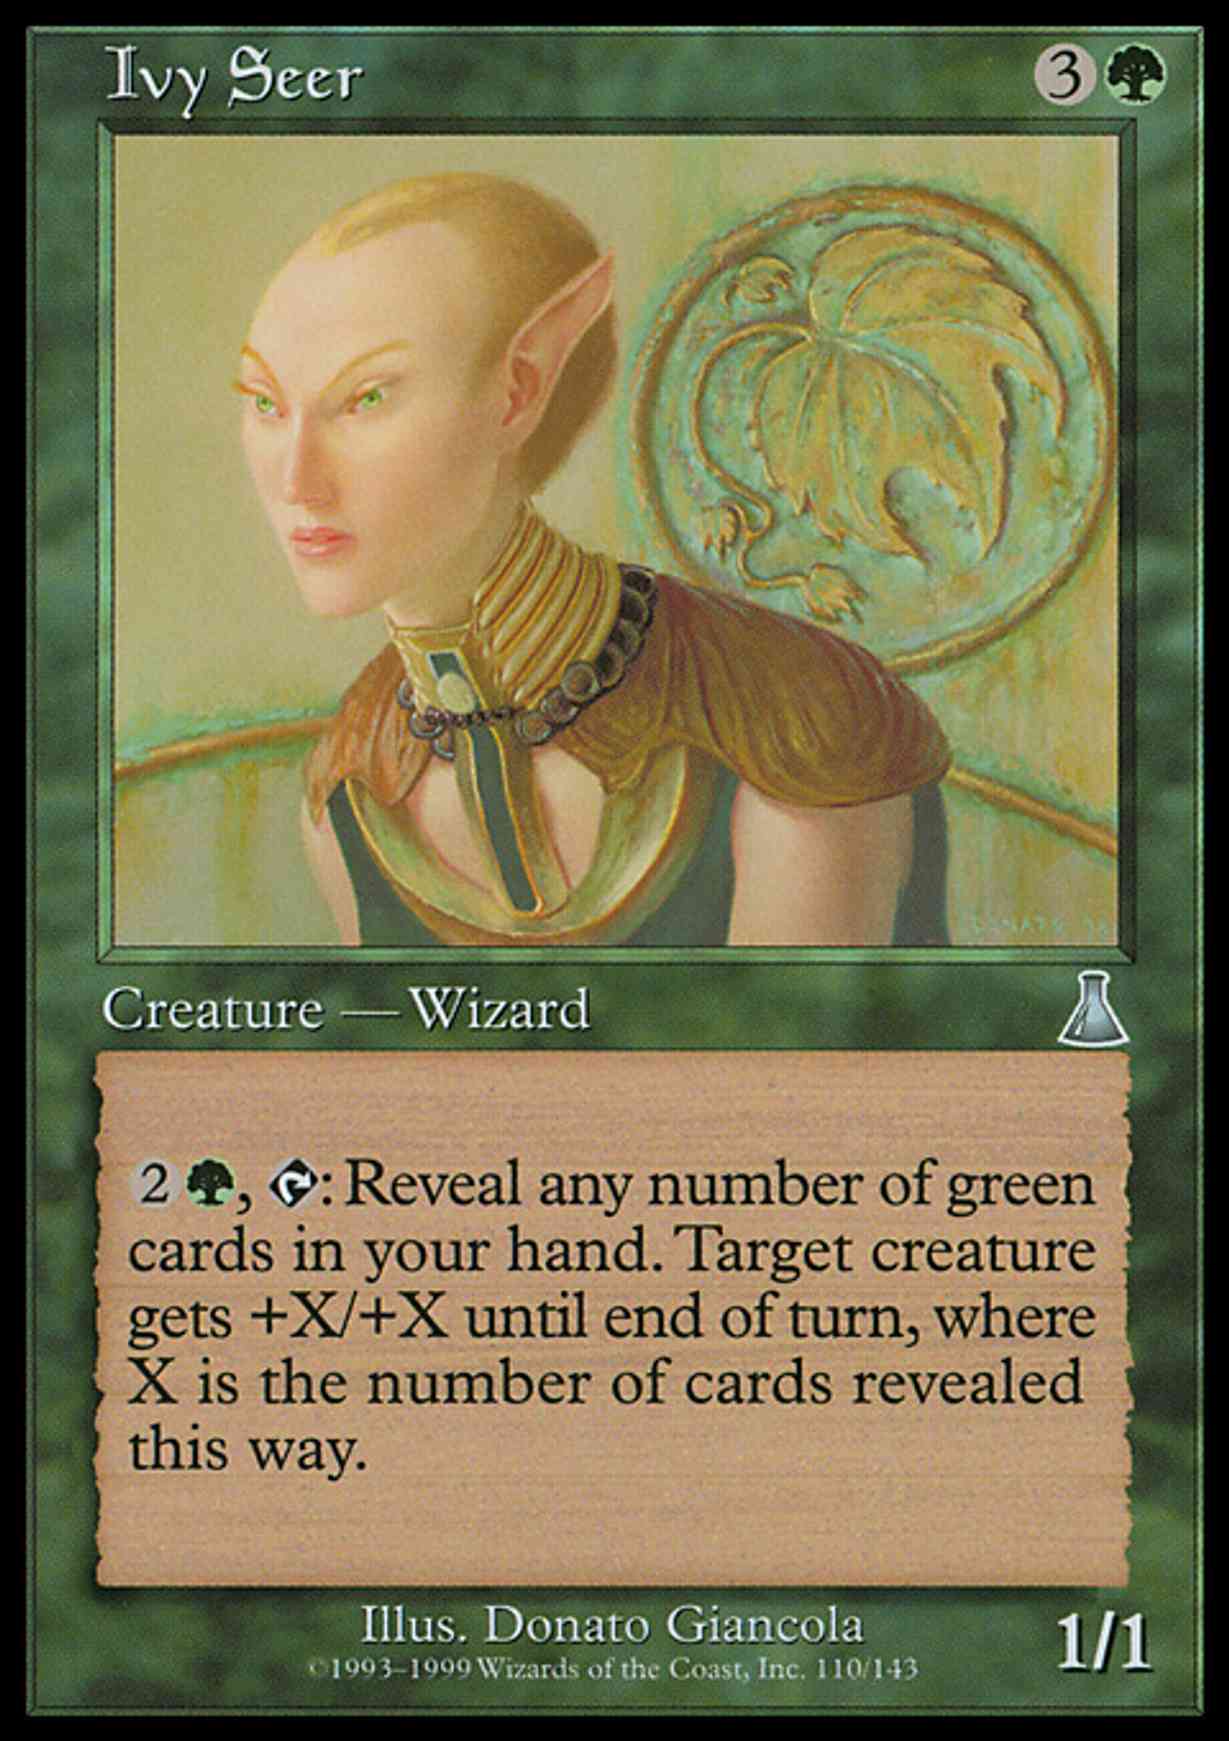 Ivy Seer magic card front